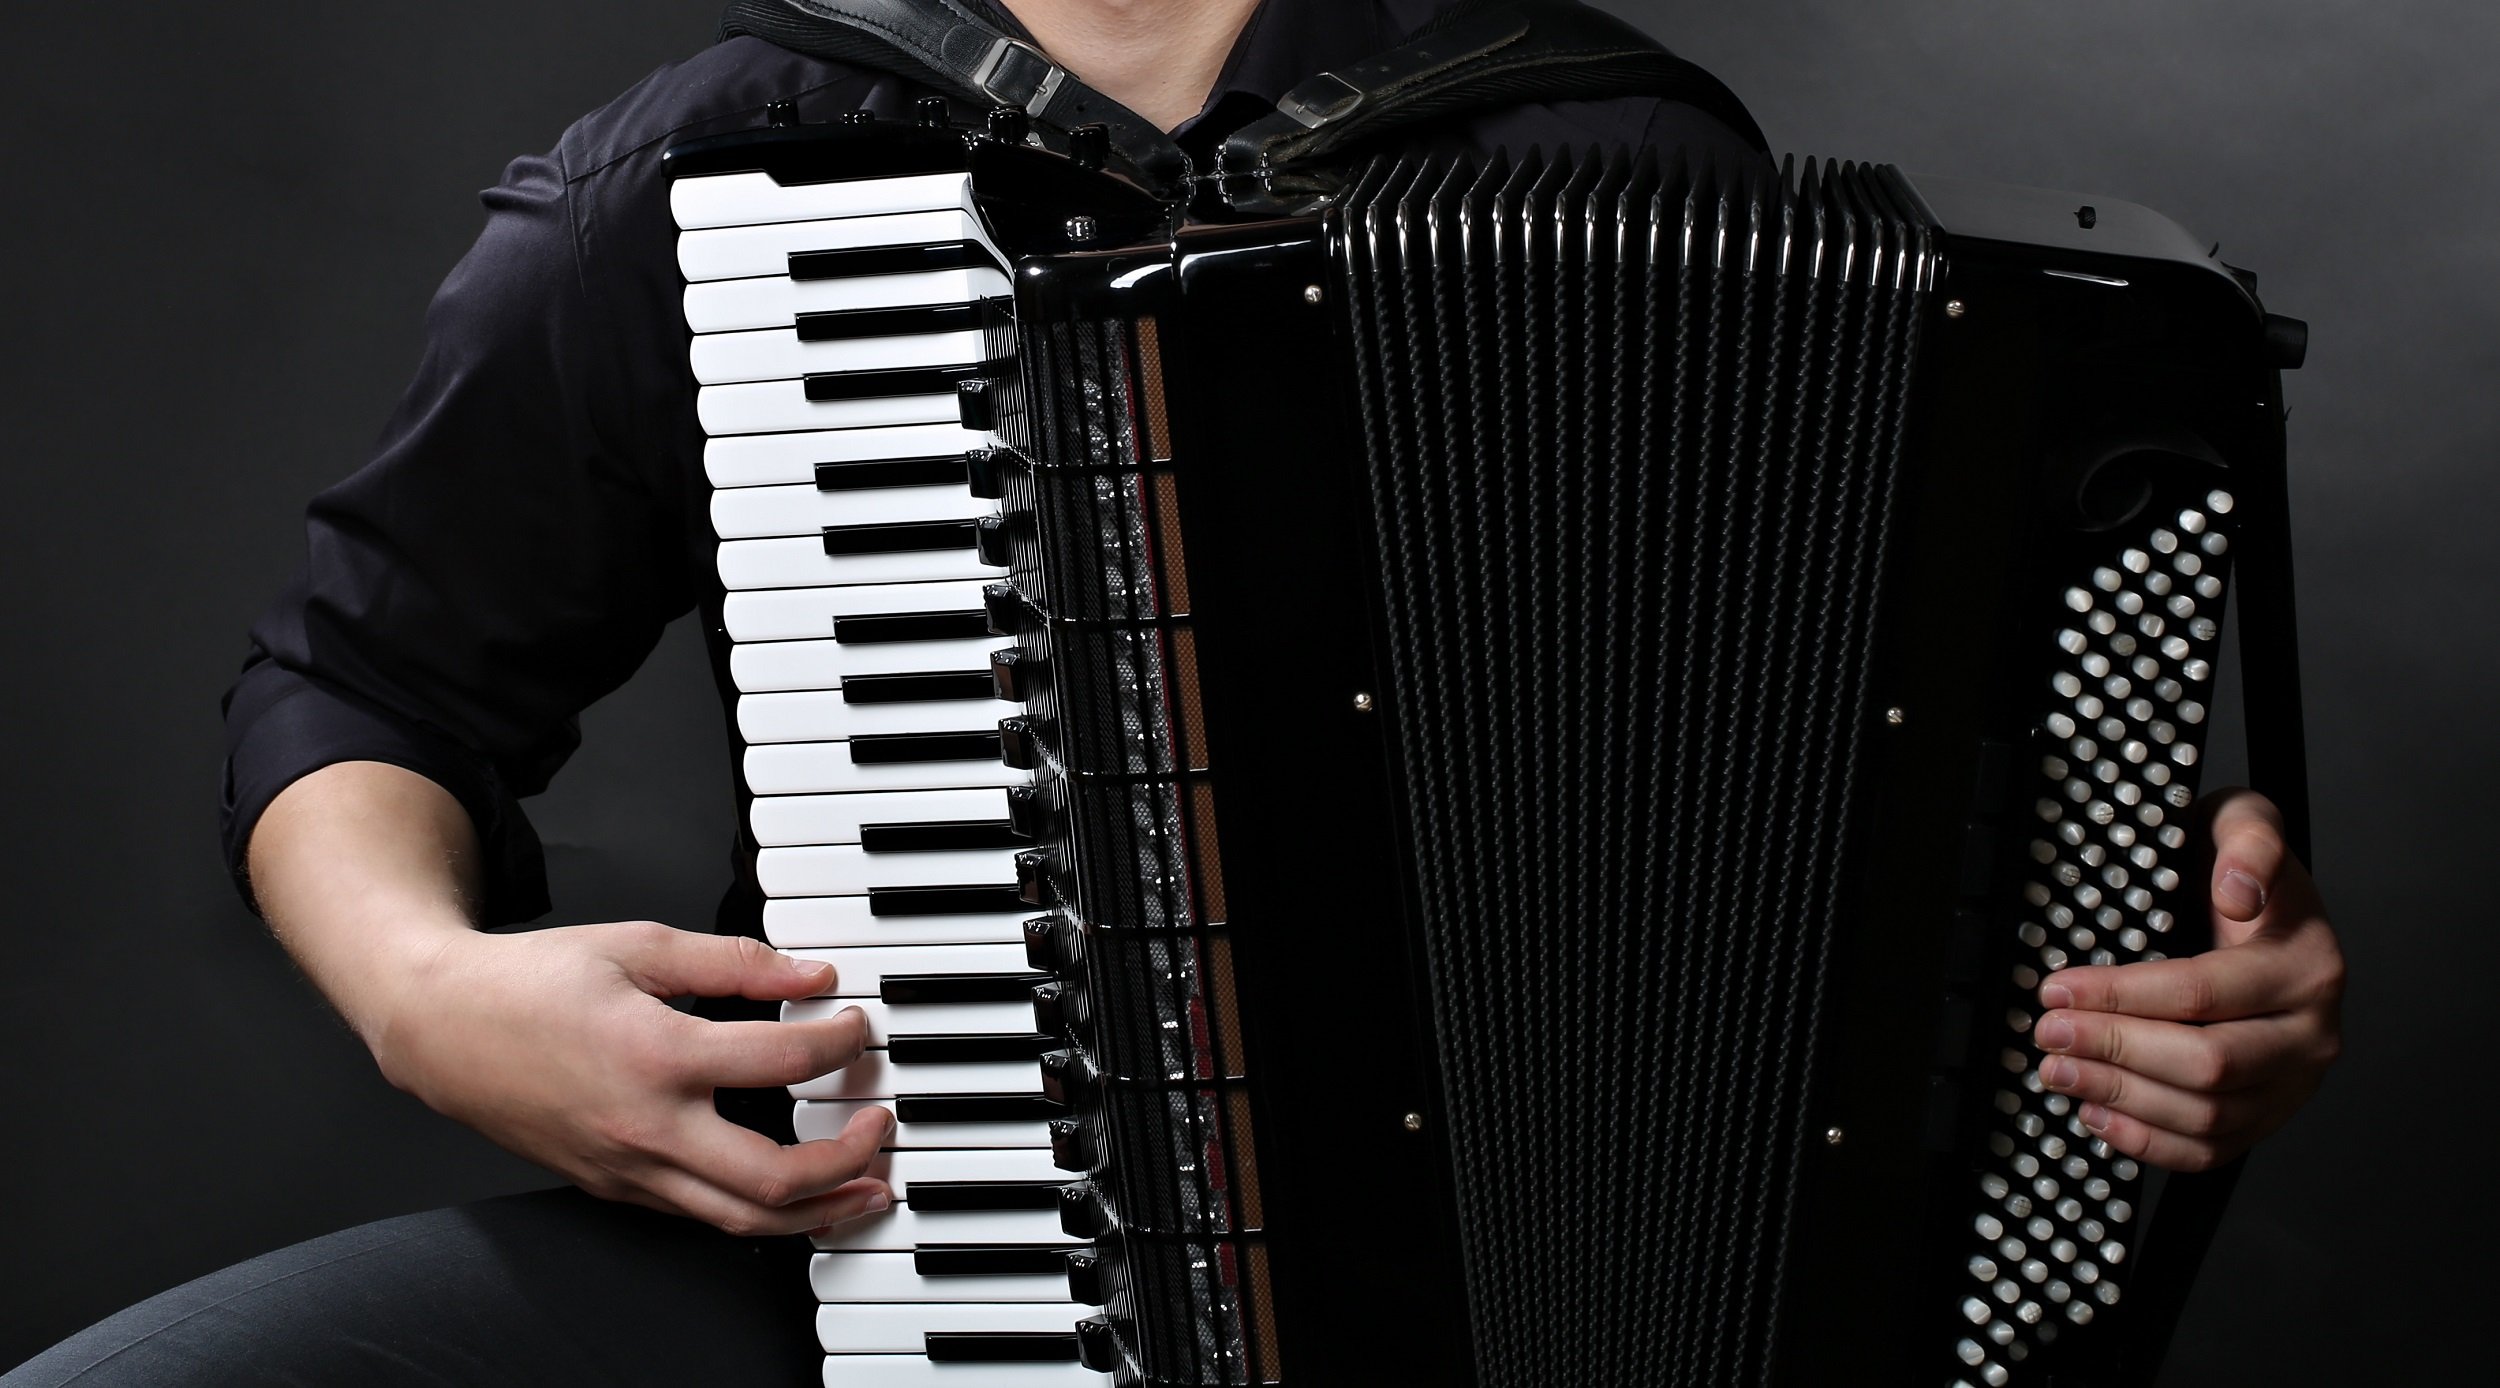 Accordion Player Covers 10 Difficulty Levels of Tetris